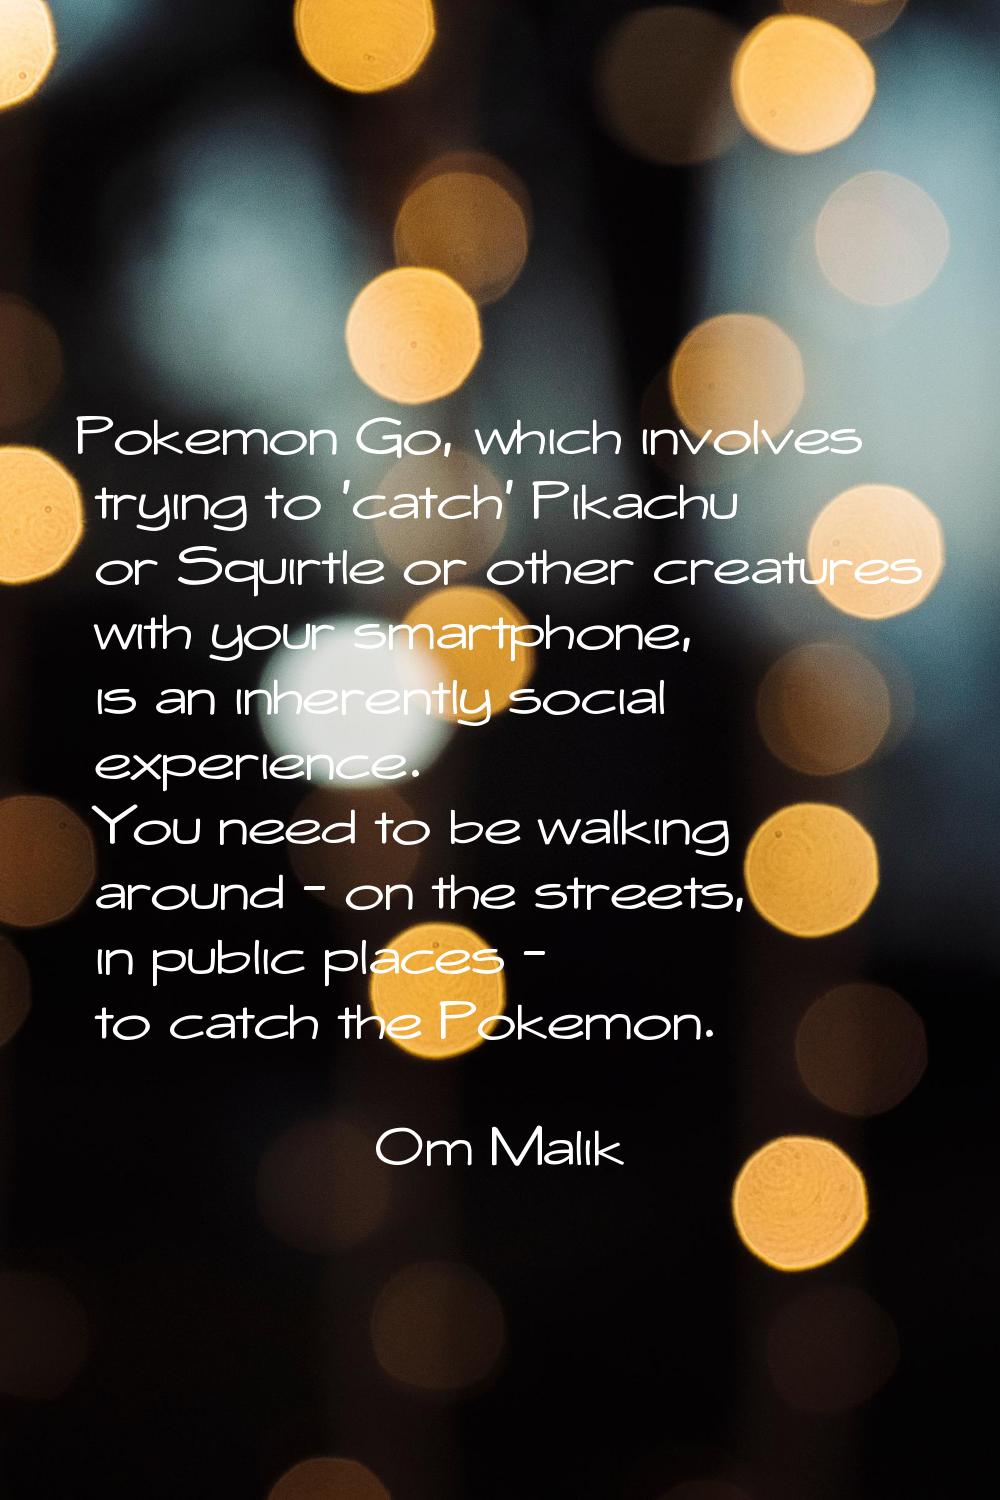 Pokemon Go, which involves trying to 'catch' Pikachu or Squirtle or other creatures with your smart